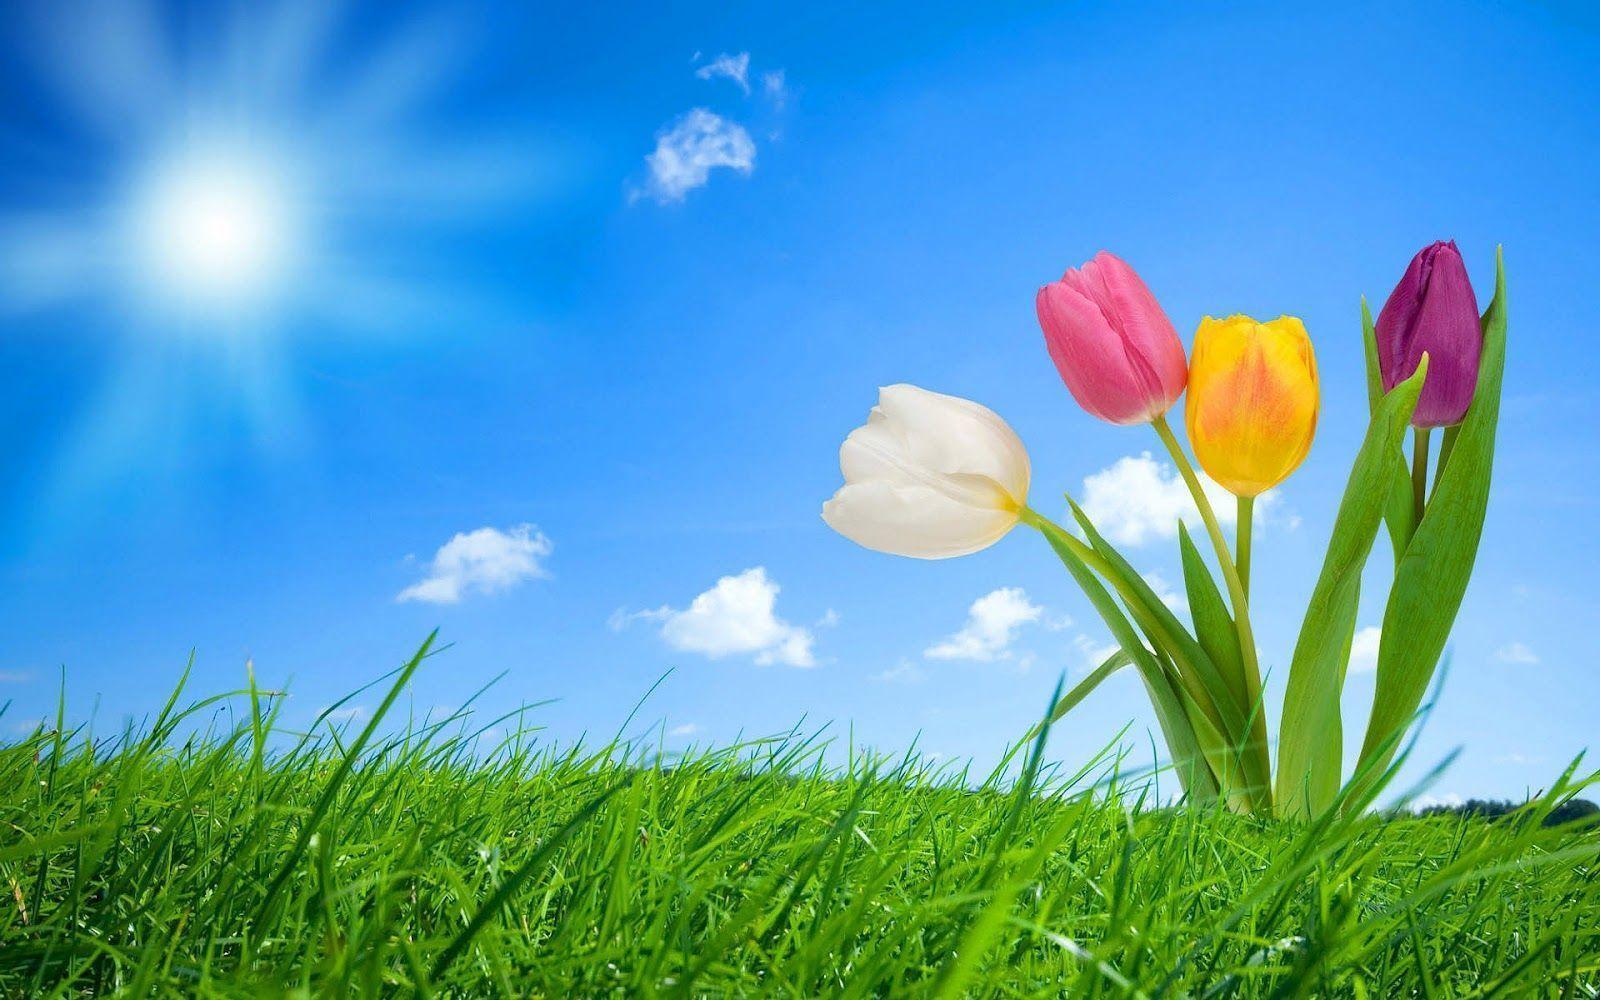 Spring Background 11 cool picture 21872 HD Wallpaper. Wallroro